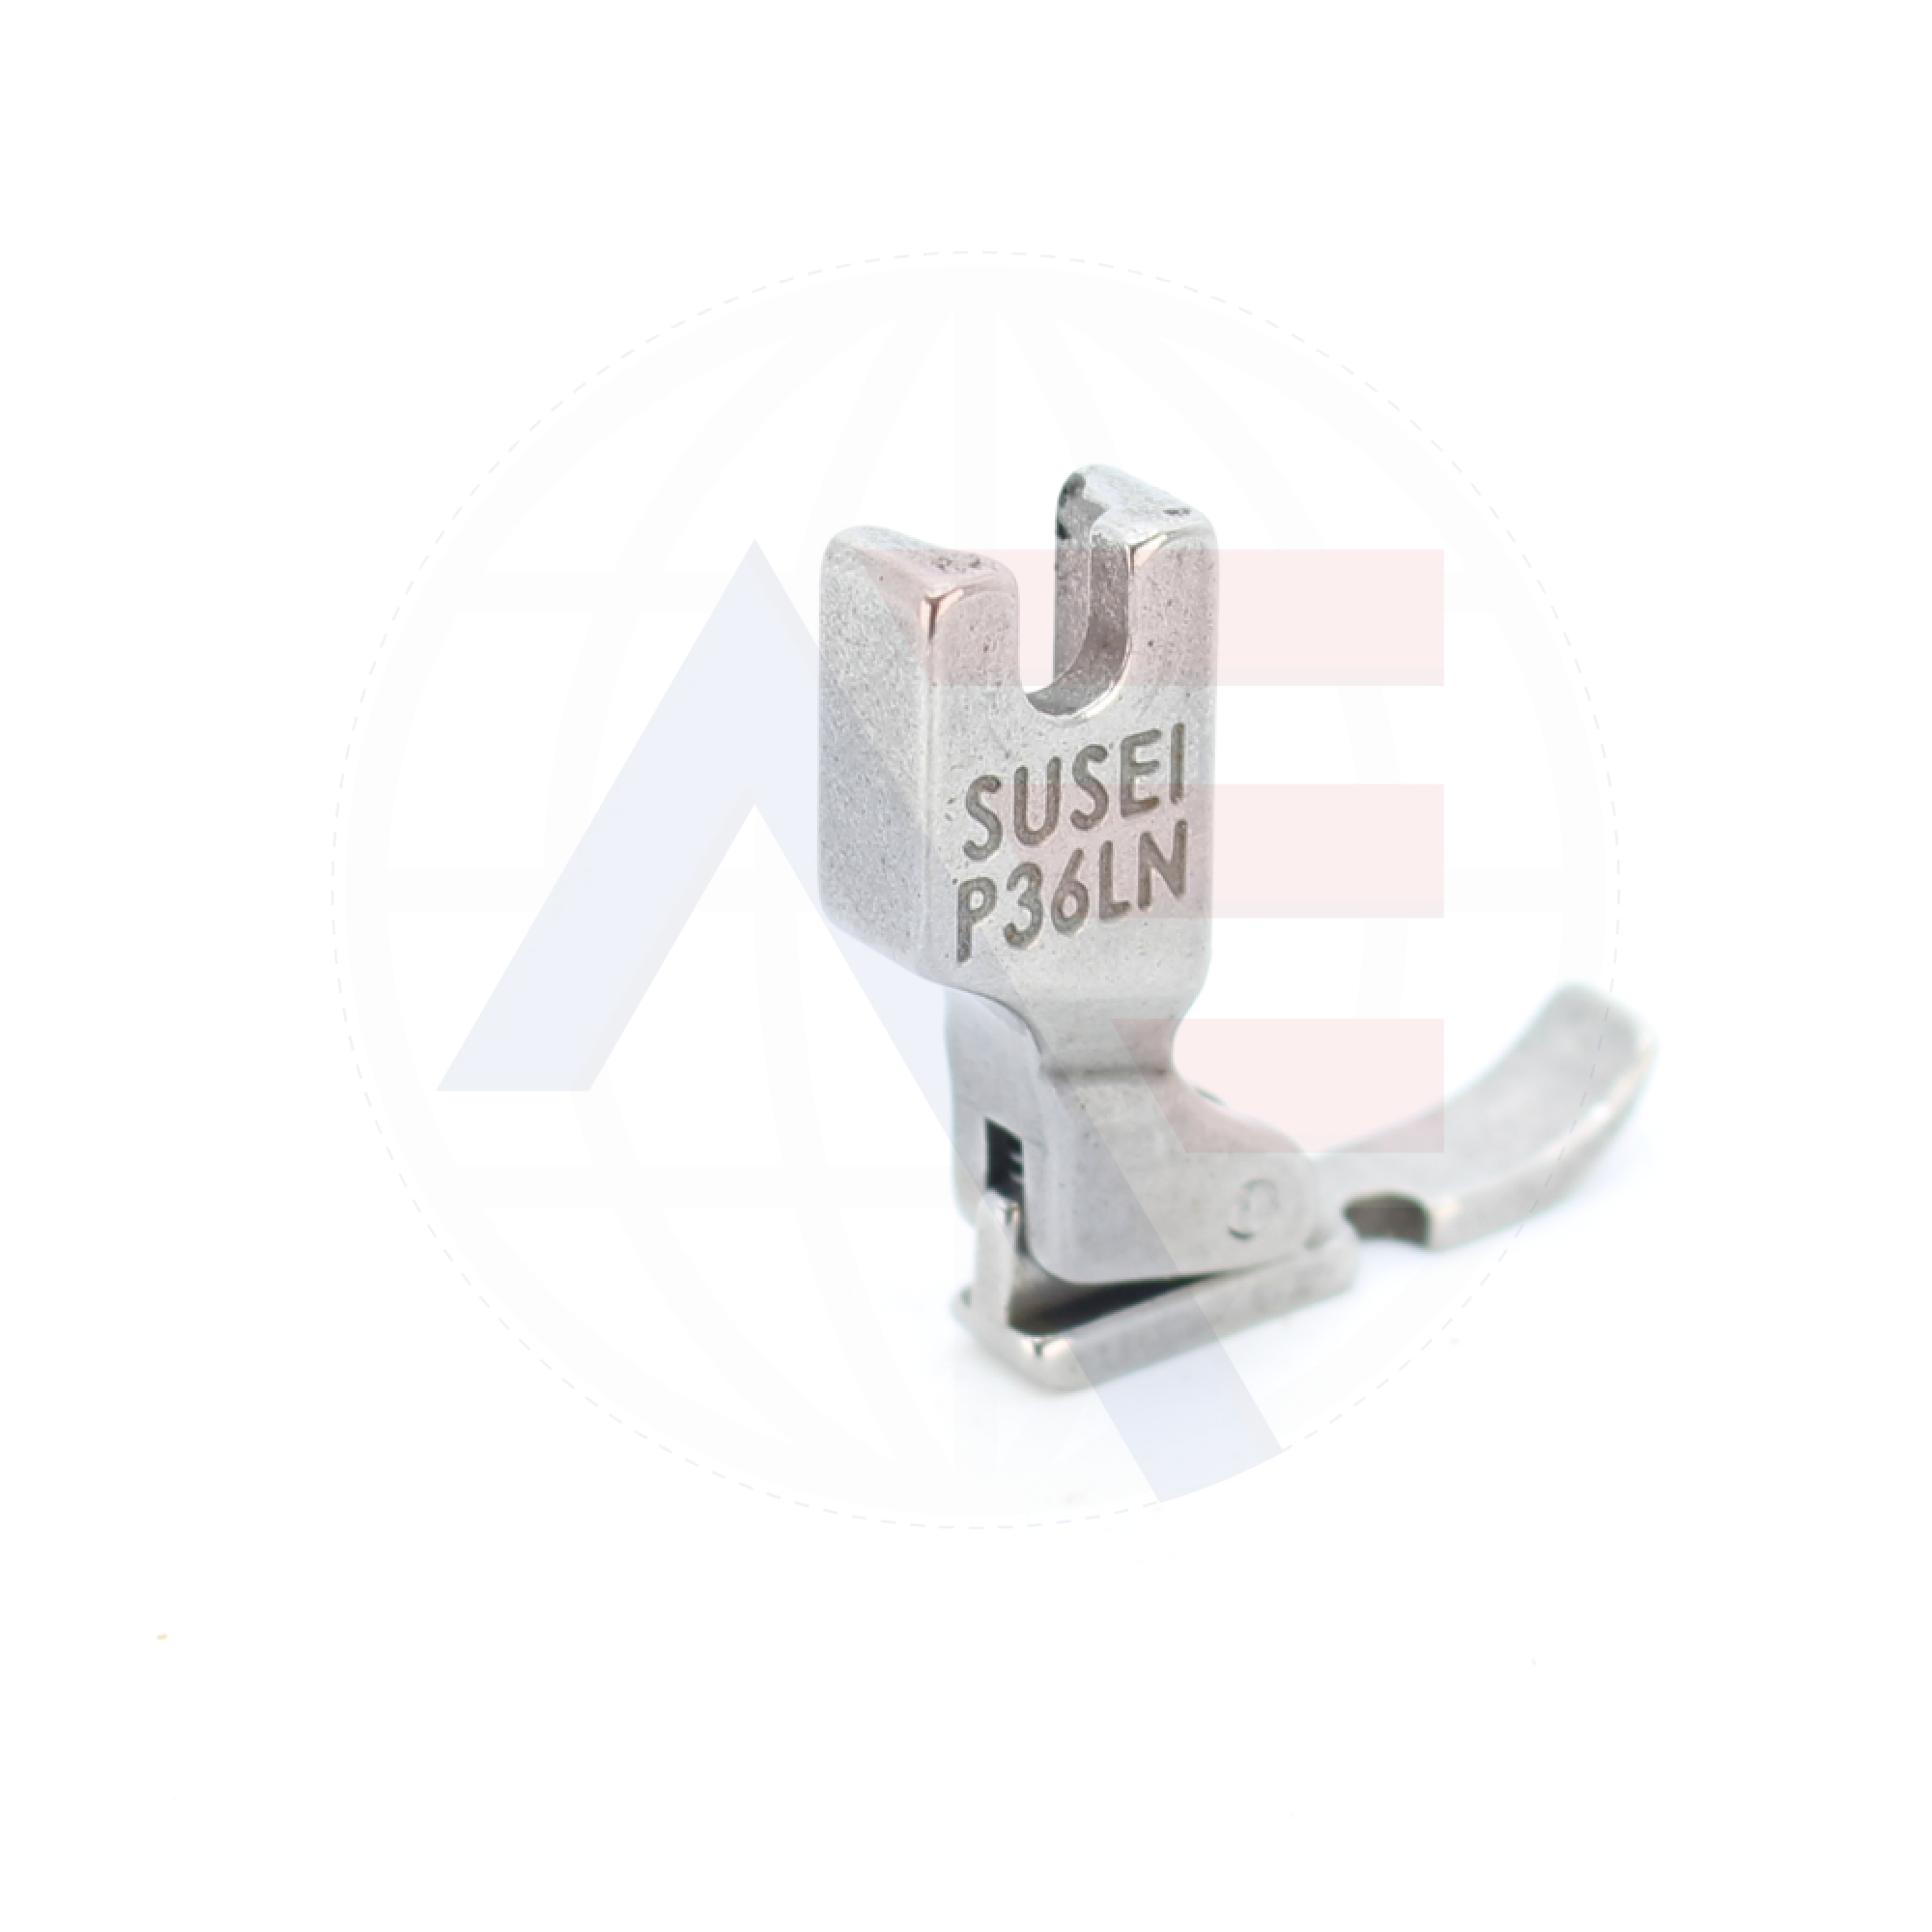 P36Ln Zip Foot Sewing Machine Spare Parts